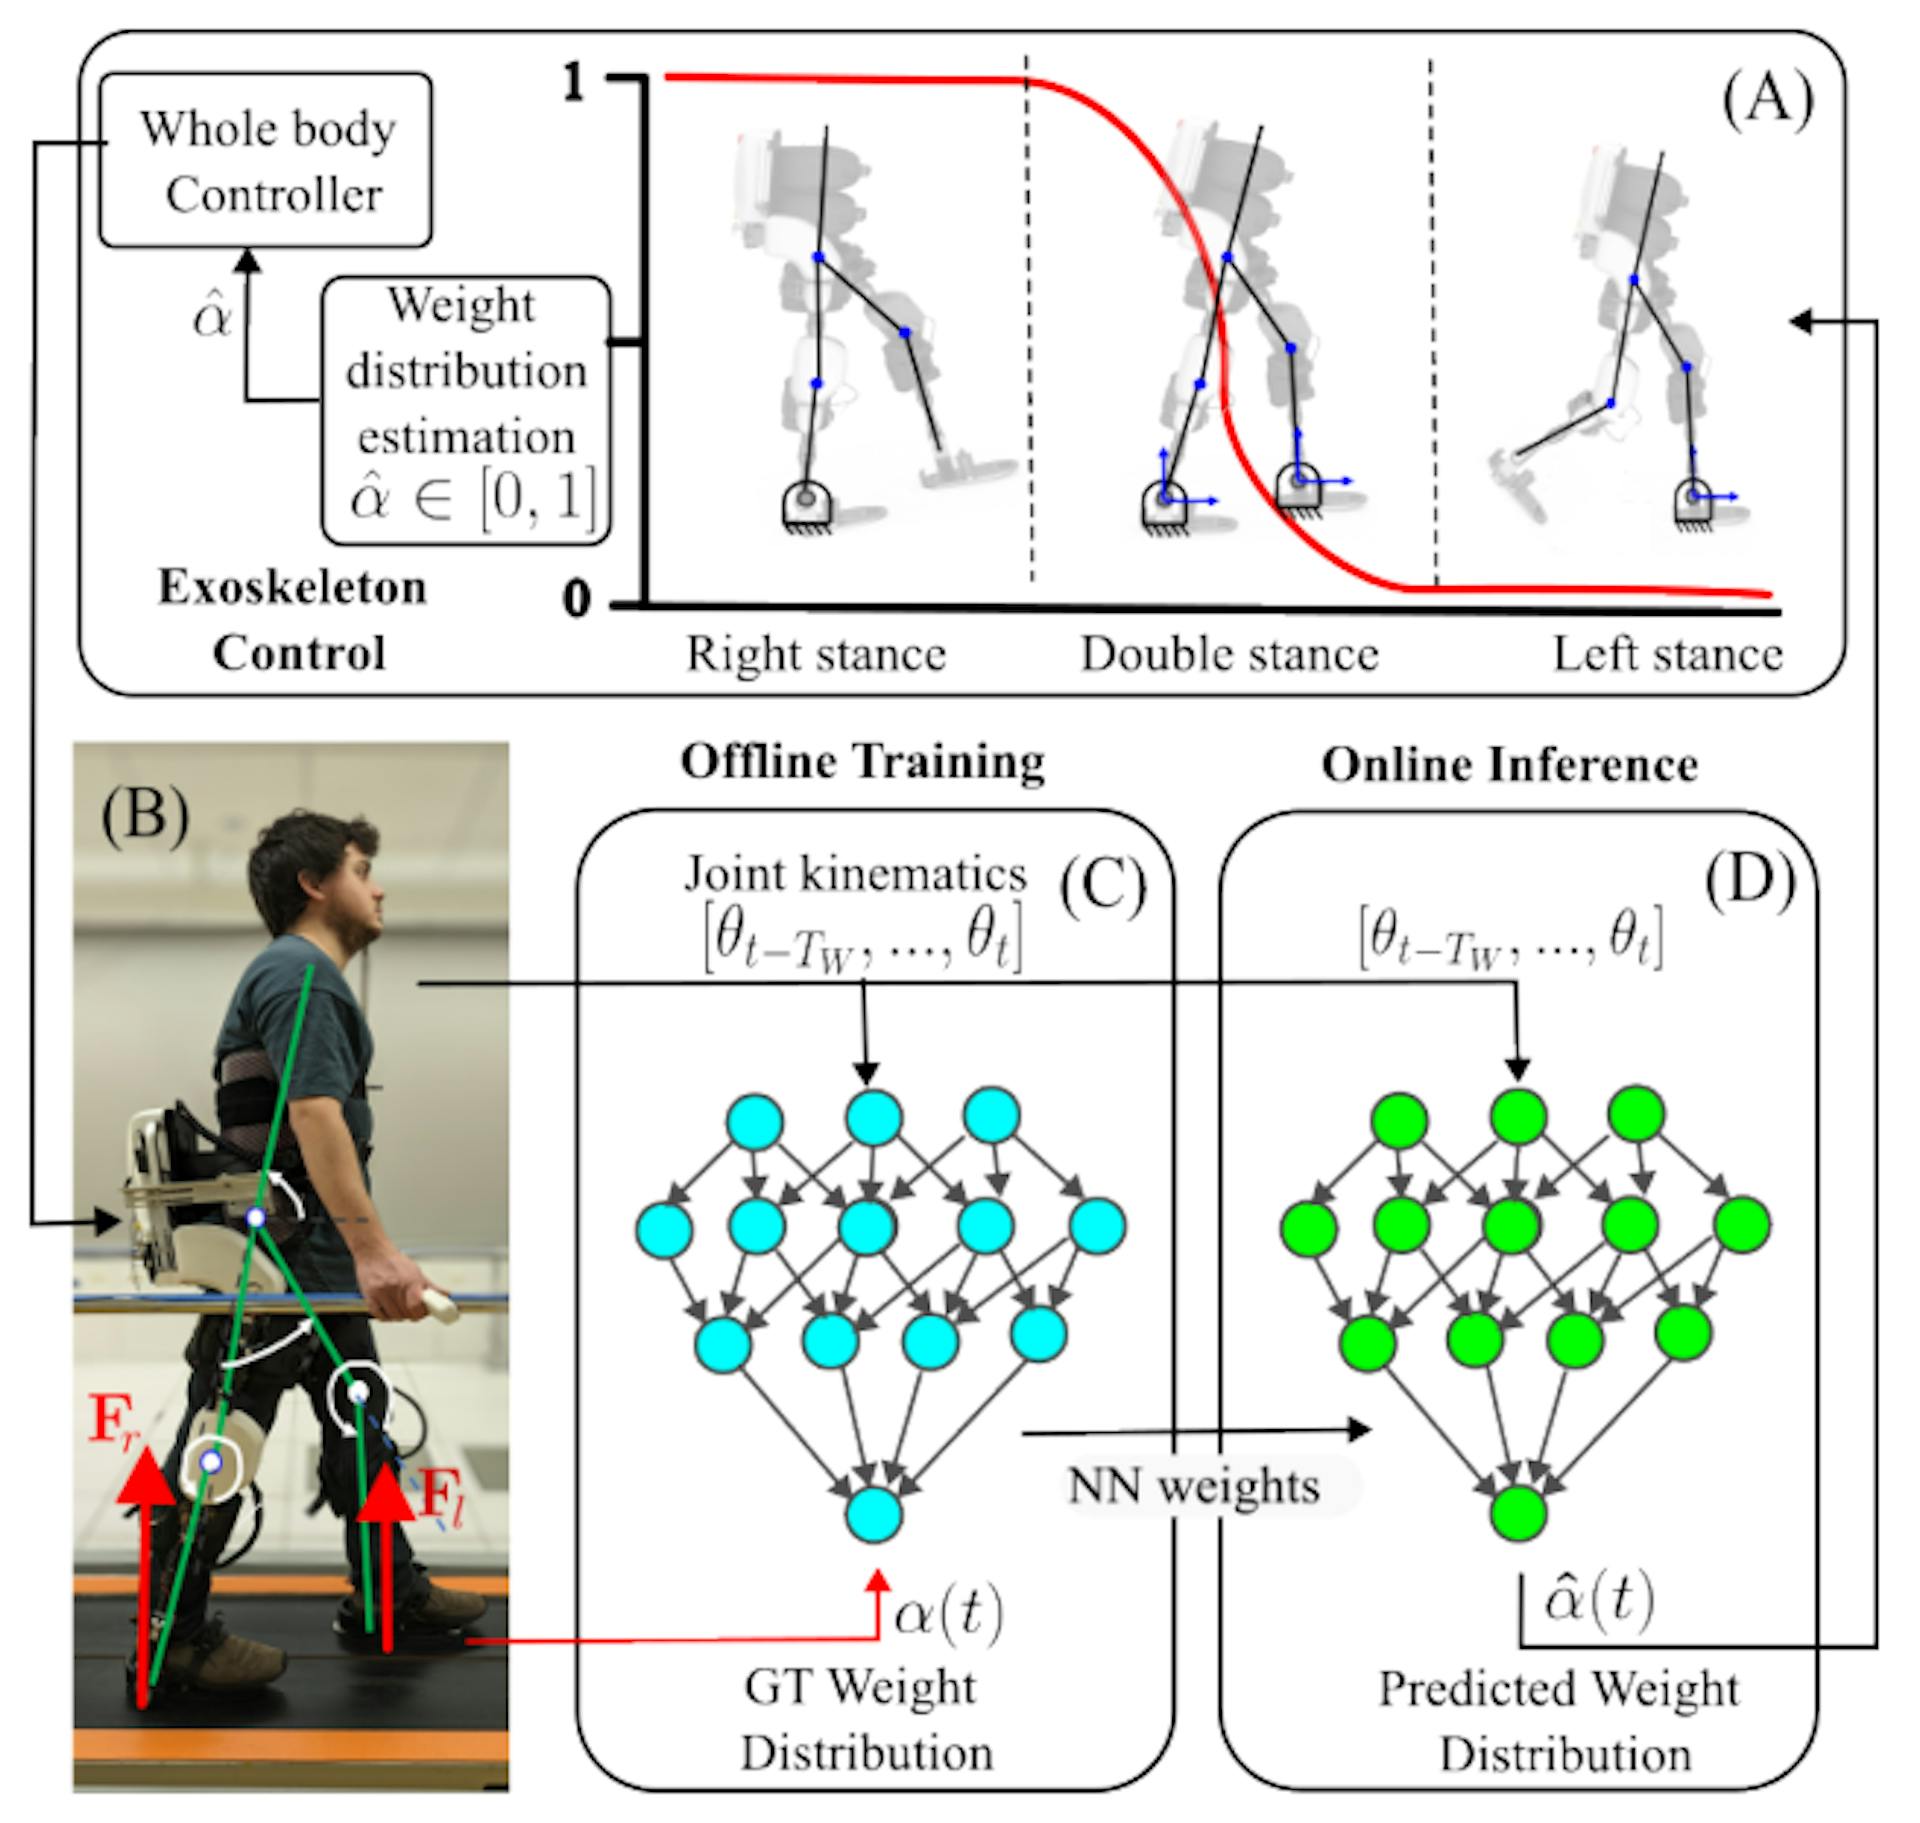 Fig. 1: Weight-distribution regression: a deep-learning approach is used to estimate the weight distribution (α) of a user-exoskeleton couple in real-time and to control the robot accordingly. Part (A) and (B) of the schema, Sec.II-A, provides an overview of the exoskeleton hardware and controller as well as the calculation of α using force sensors applied to the feet and used as ground truth value. Part (C), Sec. II-B, presents the structure of the deep-learning model and its offline training using a time-window (300ms) of kinematics information as input and ground truth values of α as output. Part (D), Sec II-C, displays how the trained model is used in the closed-loop control to predict the weight distribution (α) using kinematic information. The estimated values are passed in real-time (inference time < 1ms) to the exoskeleton controller.